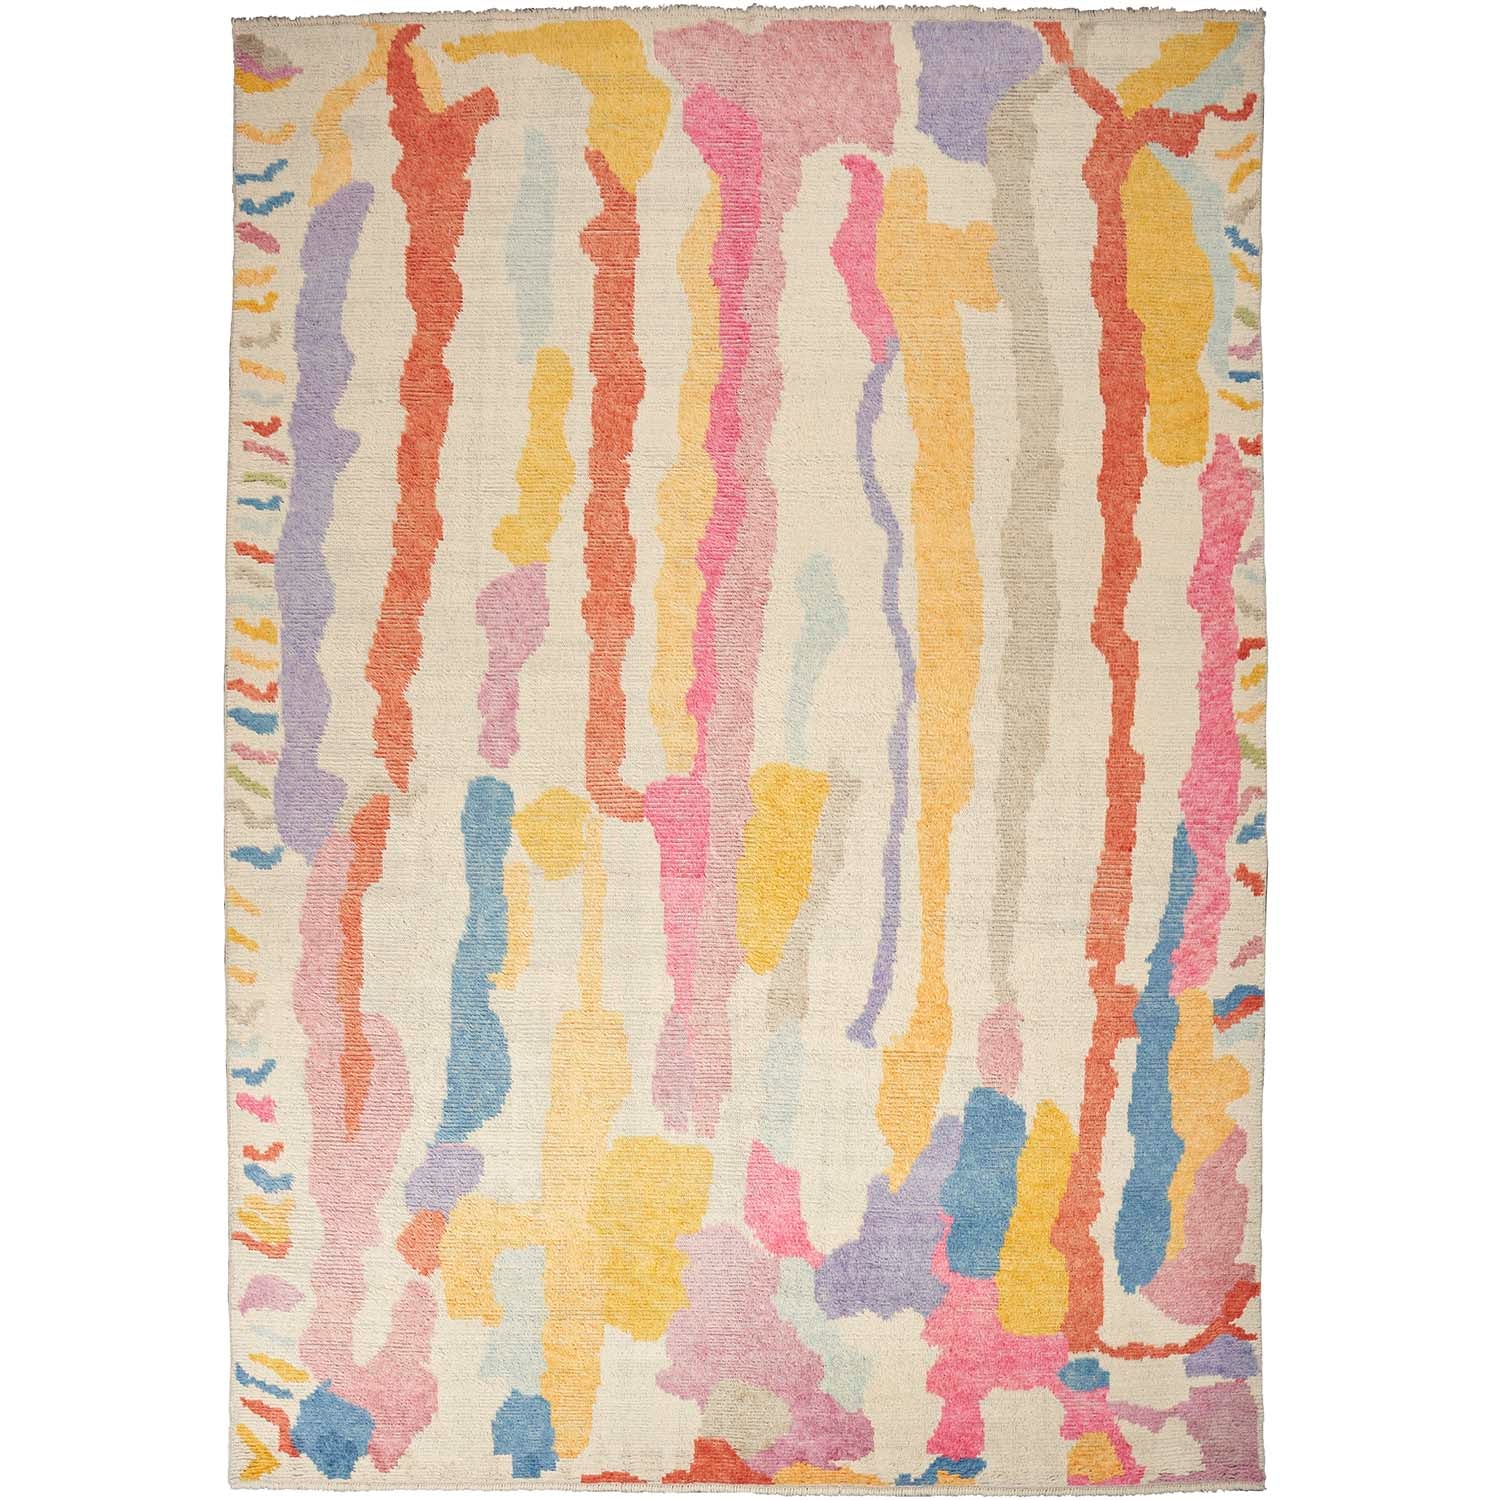 Vibrant, playful rug with abstract, colorful stripes complements modern interiors.